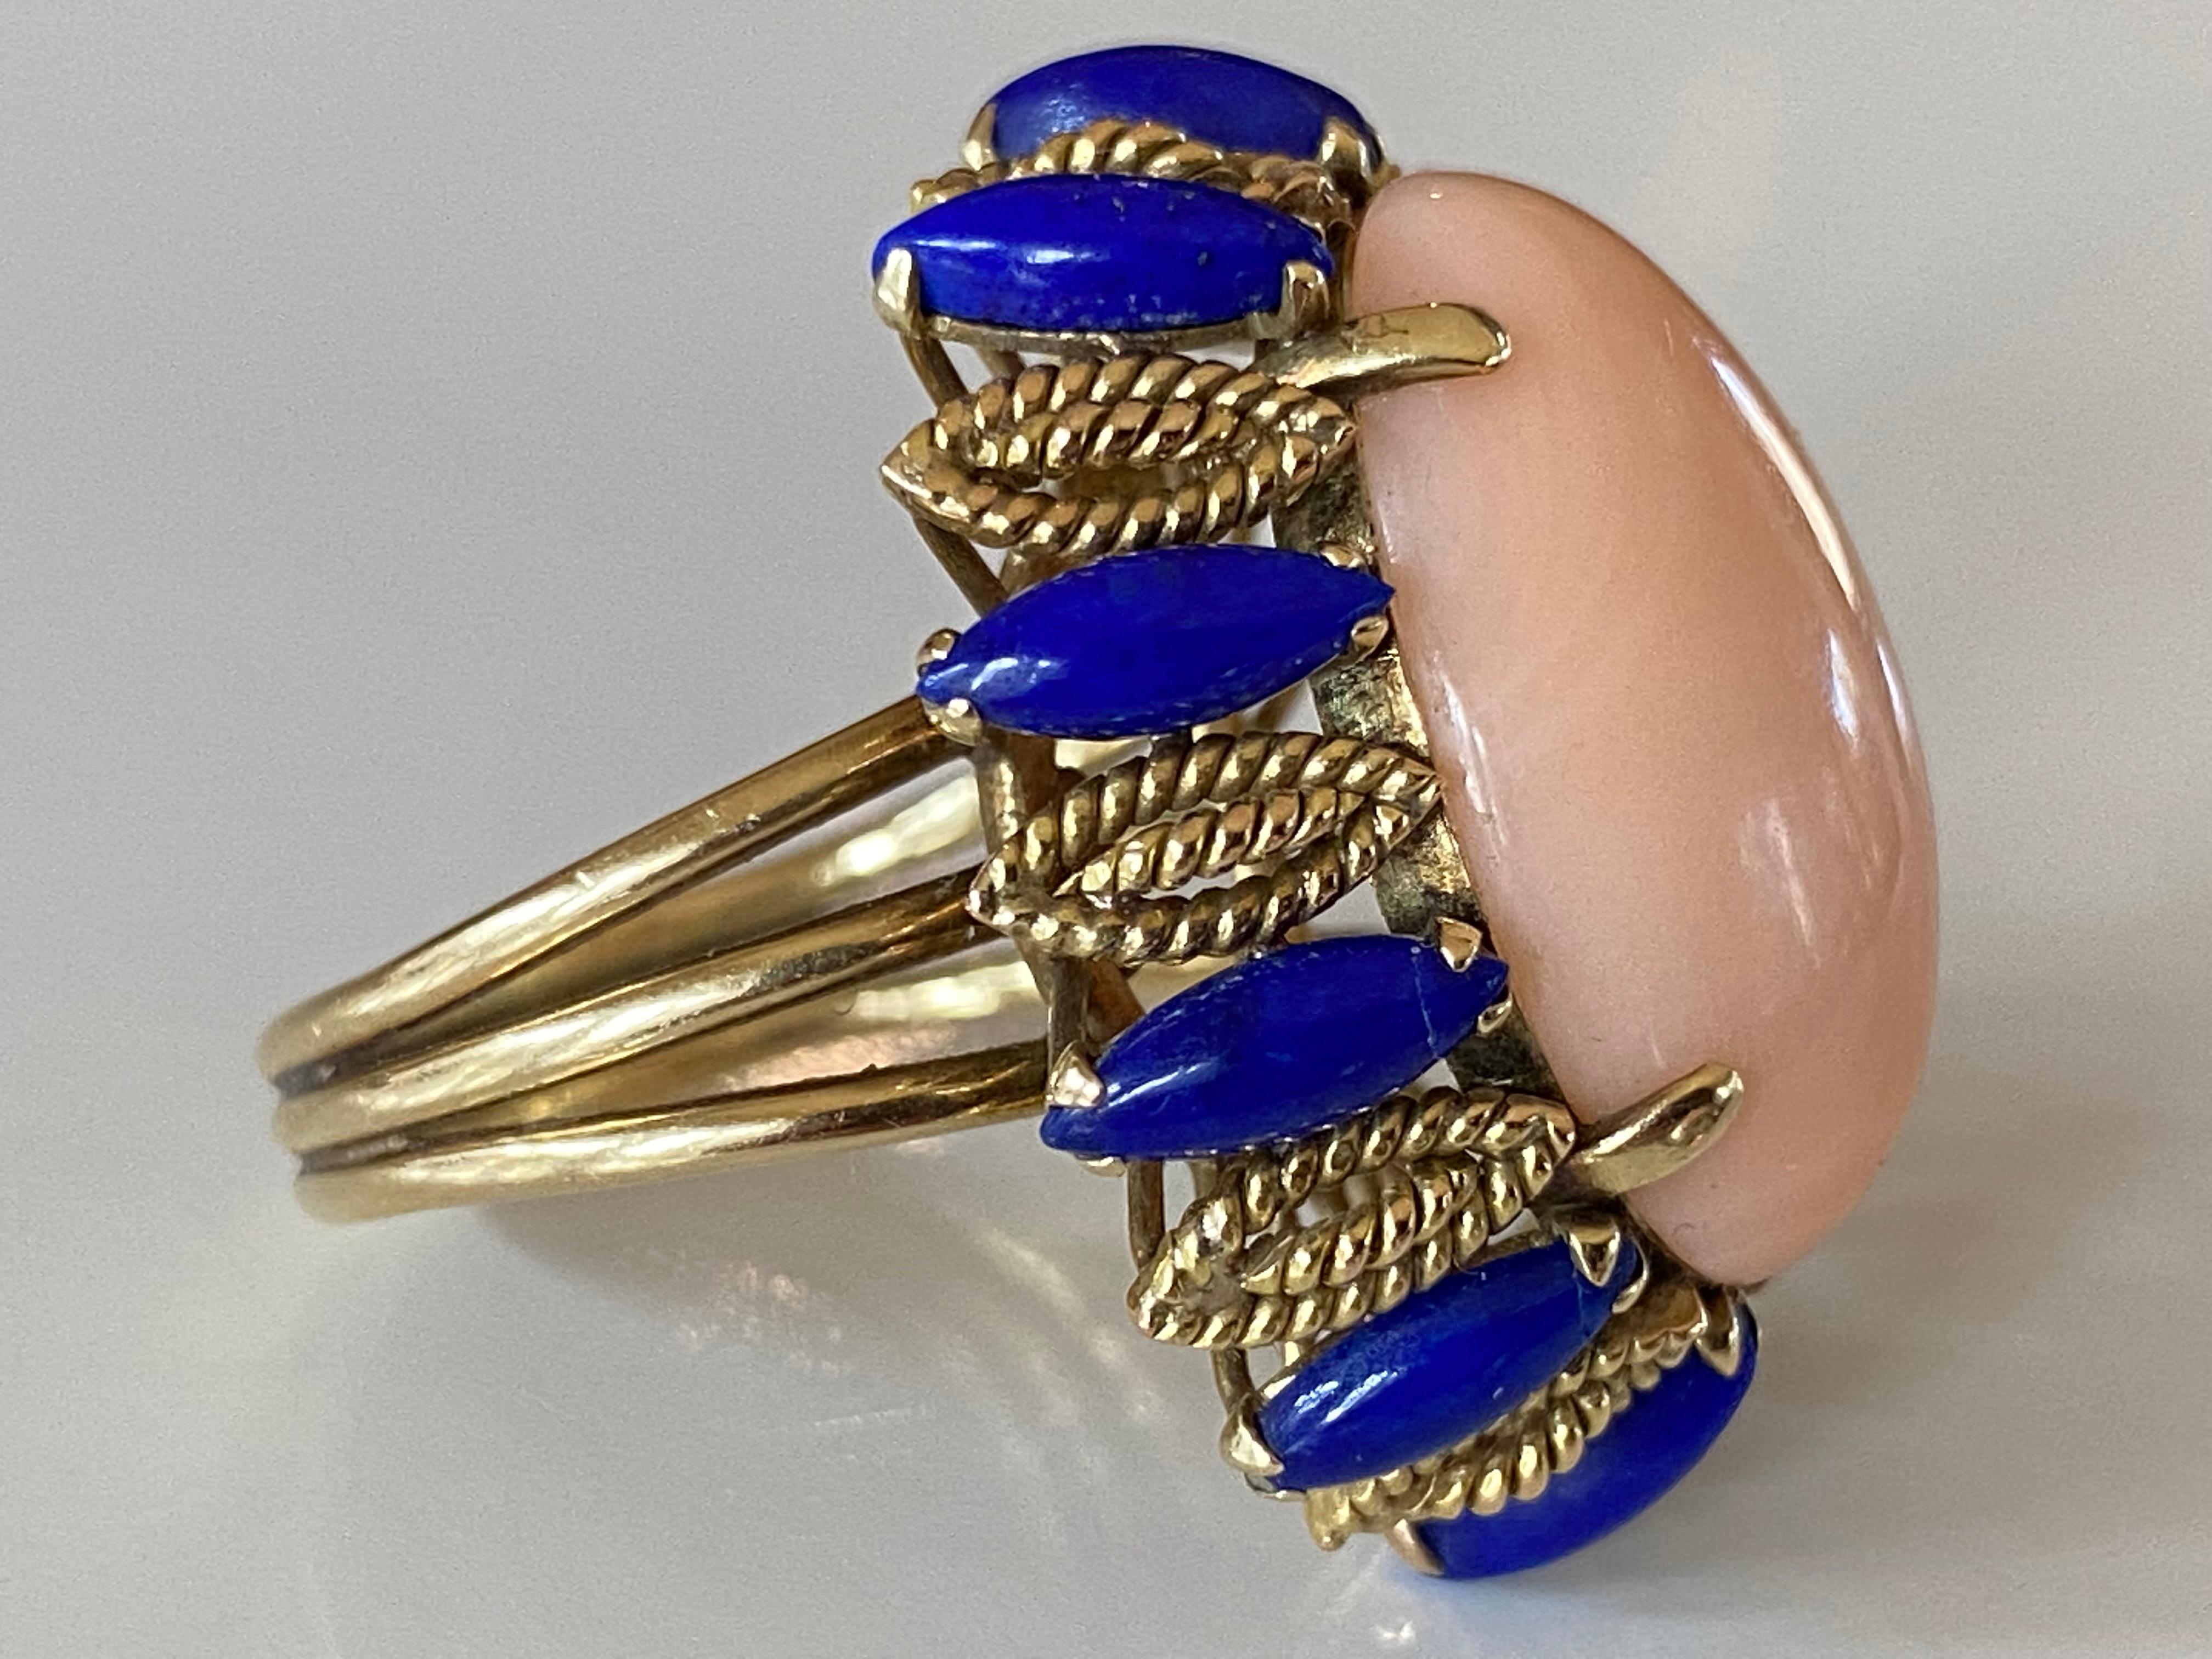 Crafted in the 1950s in 14kt yellow gold, this stunning mid-century cocktail ring features a natural angel skin coral oval-shaped cabochon measuring approximately 14 x 20mm encircled by ten marquis-shaped lapis lazuli stones. Matching earrings